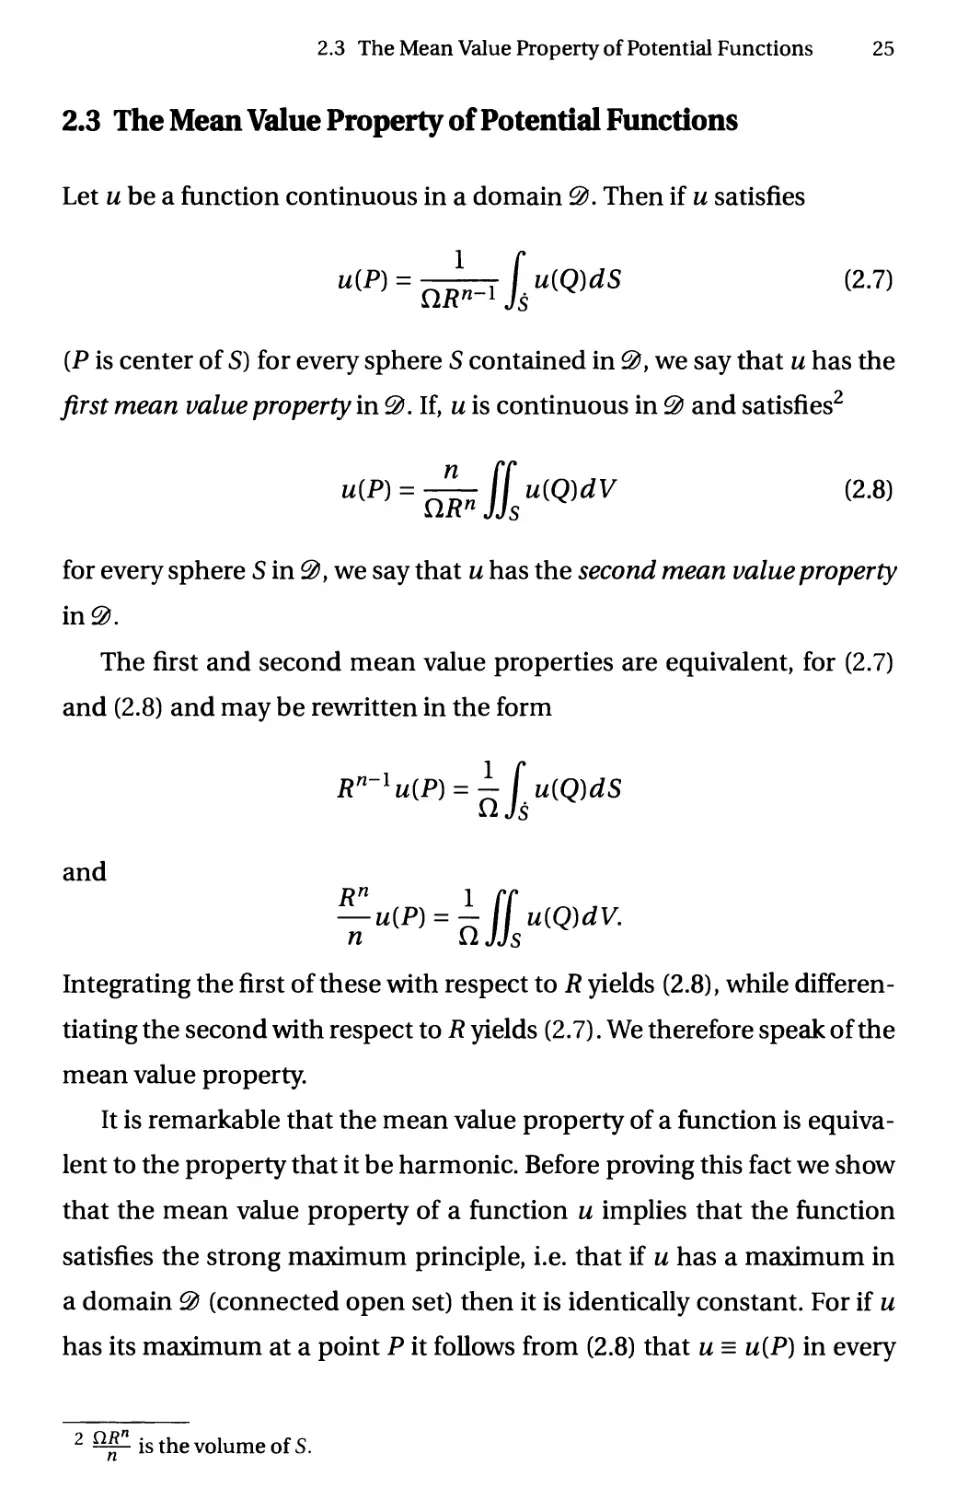 2.3 The Mean Value Property of Potential Functions